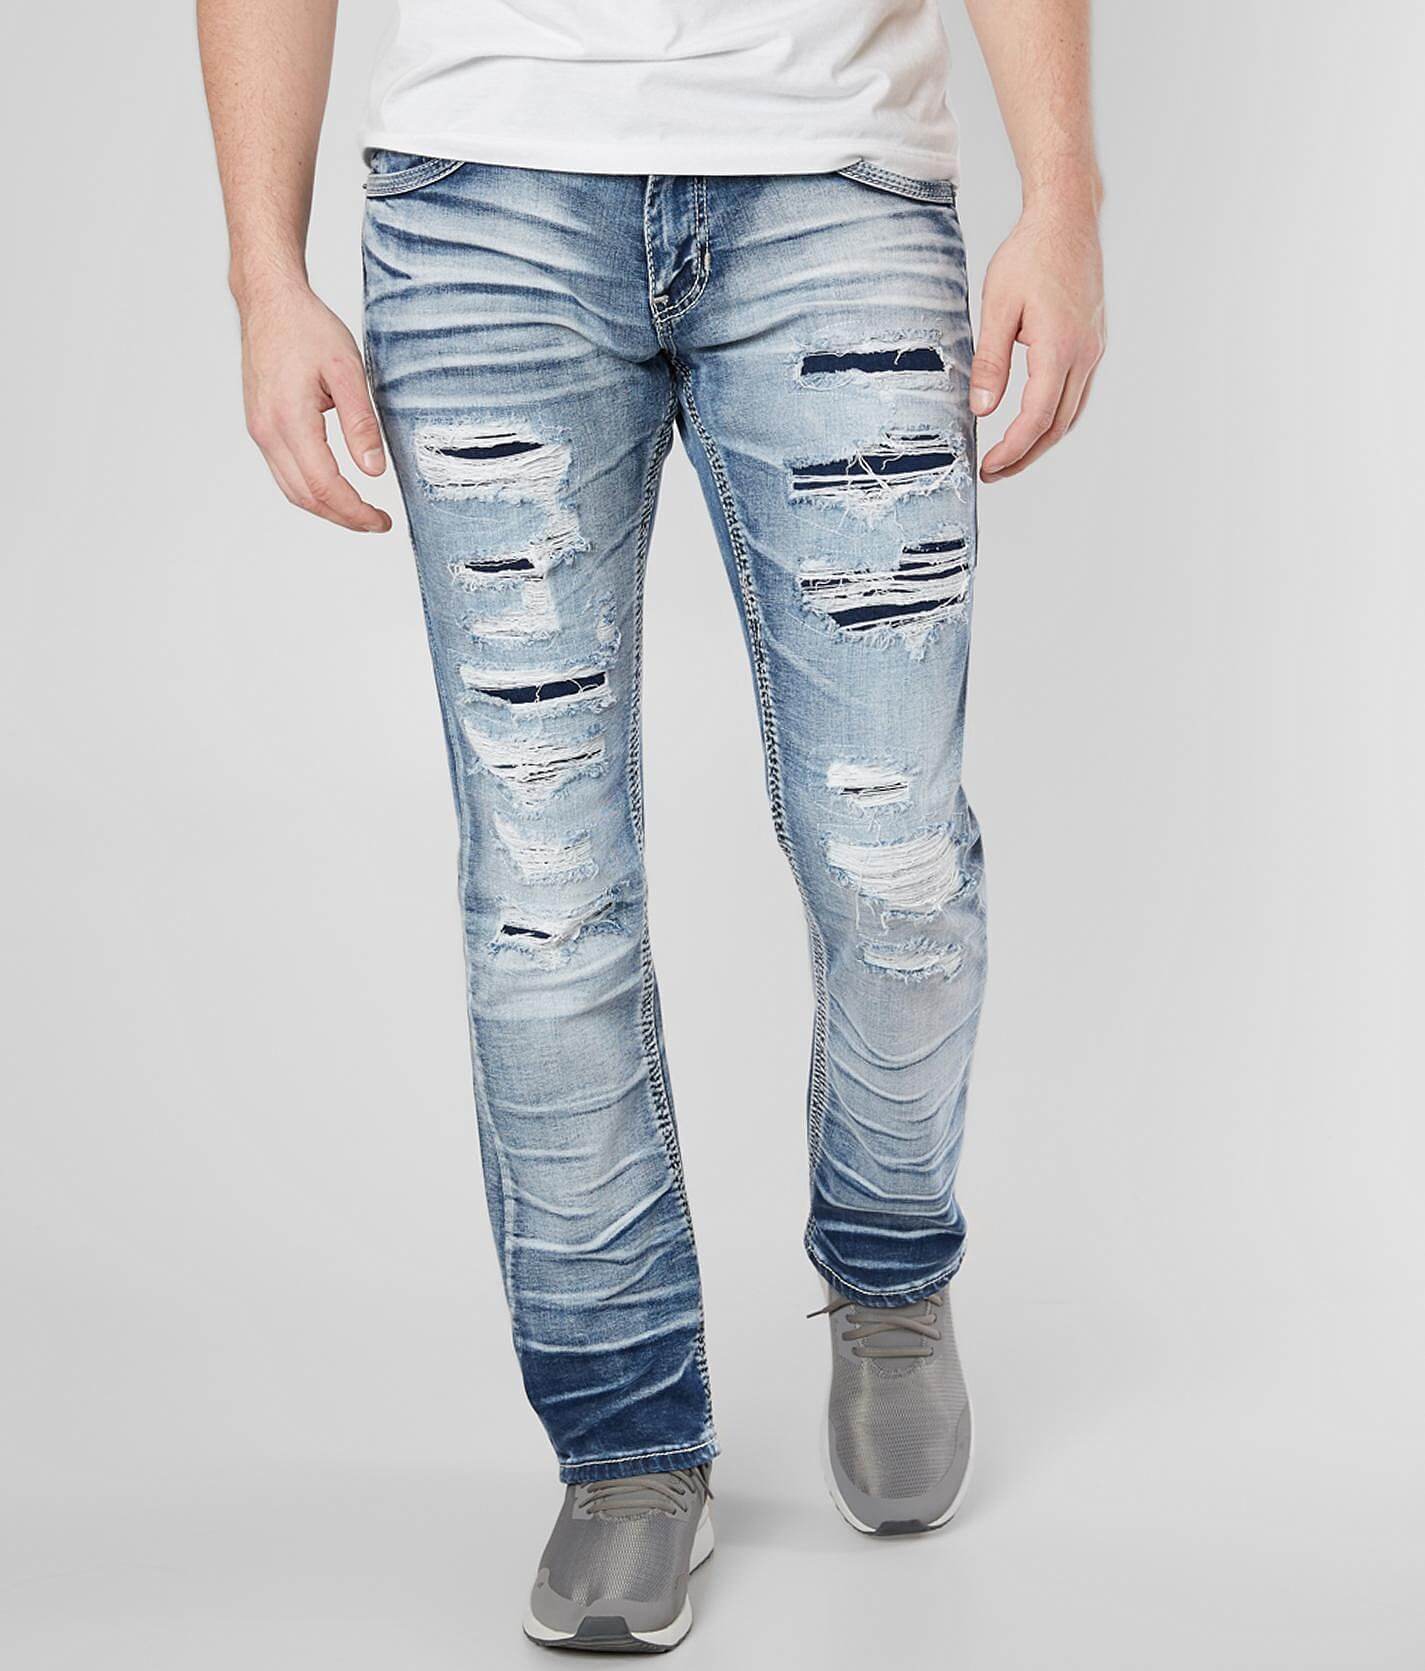 buckle american fighter jeans